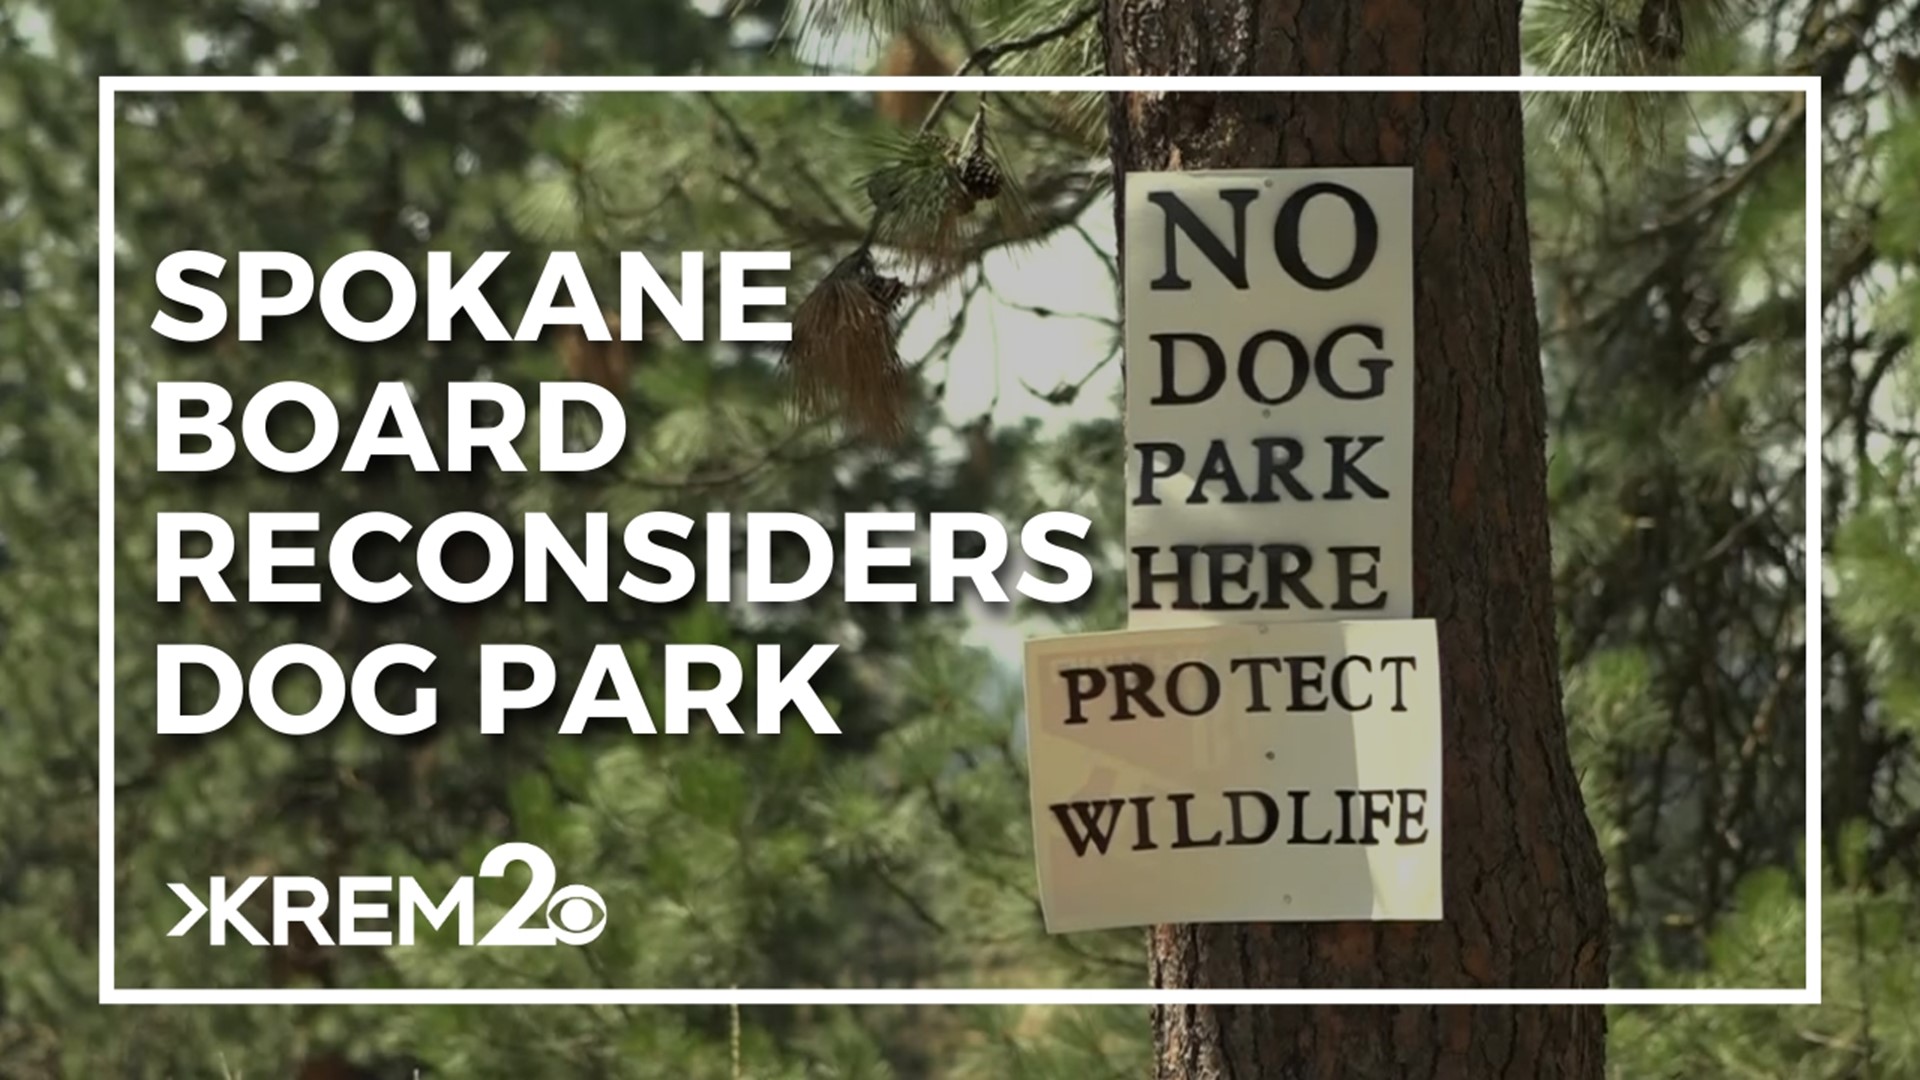 Thursday, the Spokane Parks board will consider a resolution to withdraw its selection of Upriver Drive for the location of a new dog park.